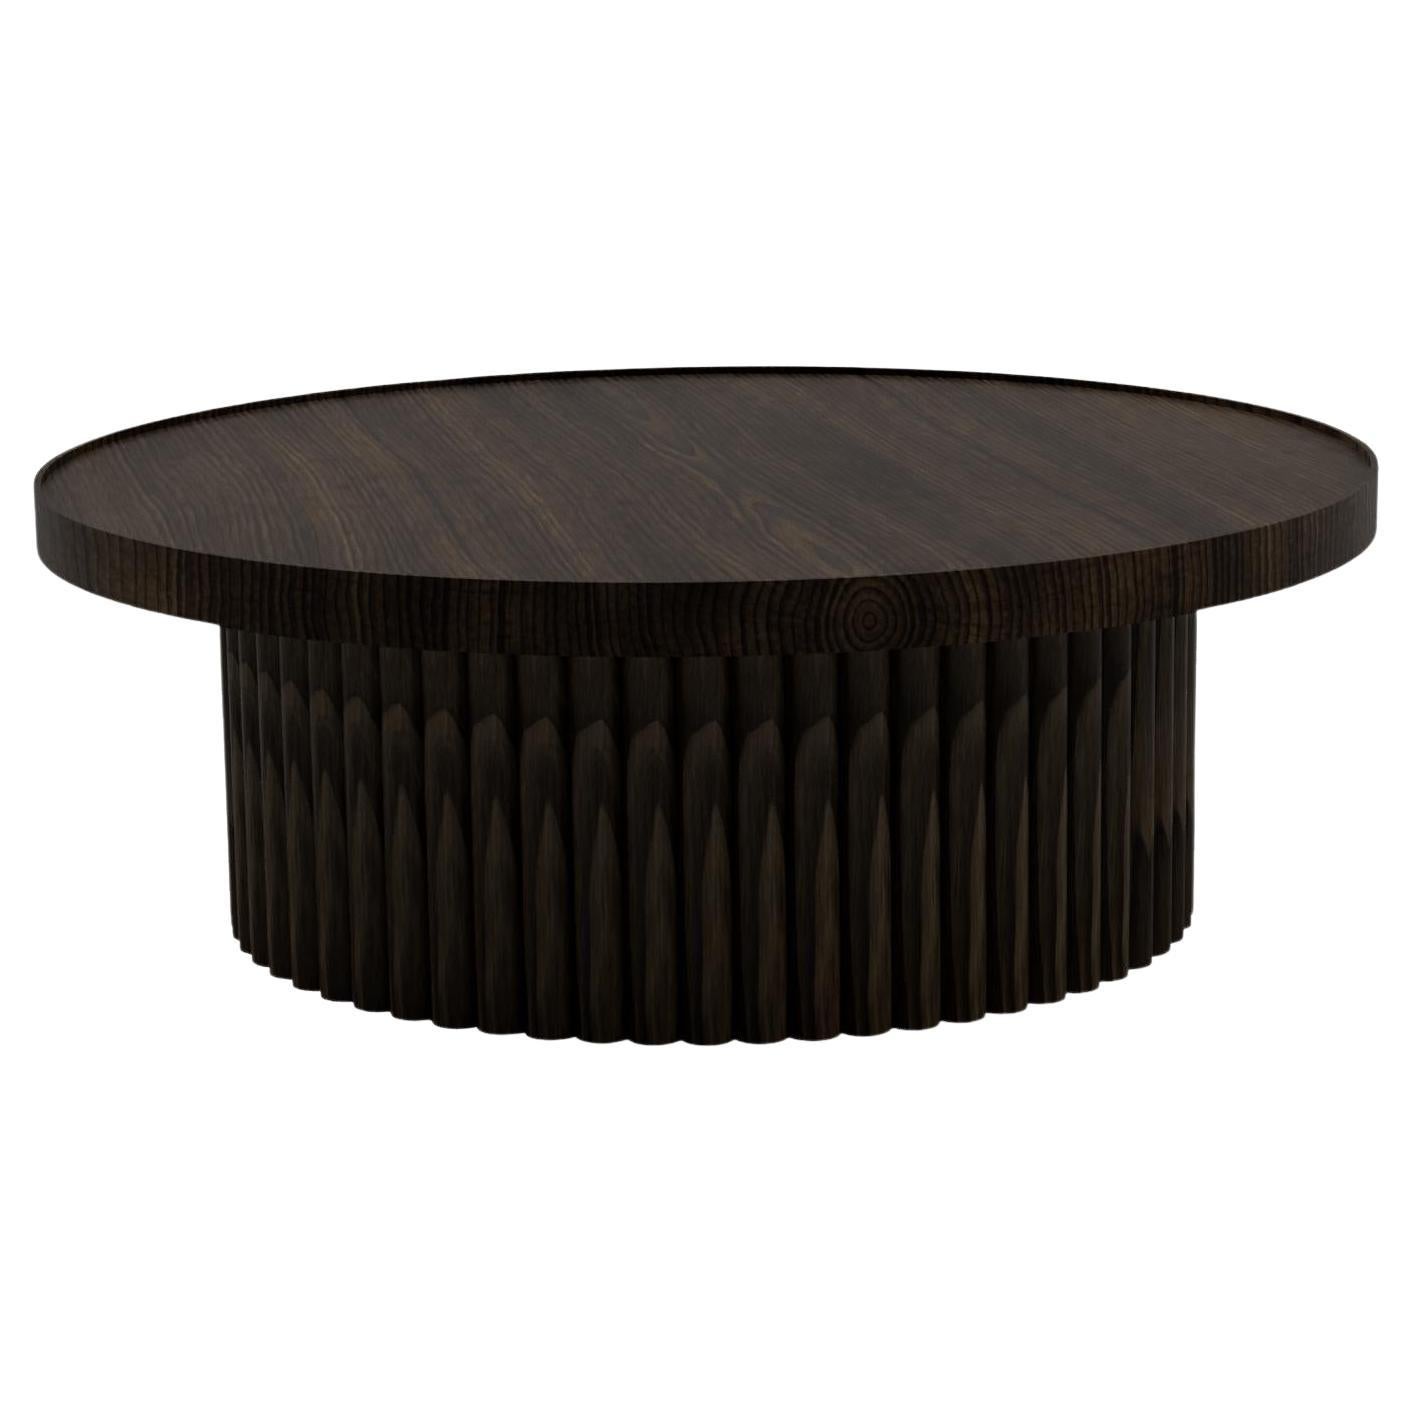 Modern Walnut Loki Coffee Table from the Signature Series by Pompous Fox